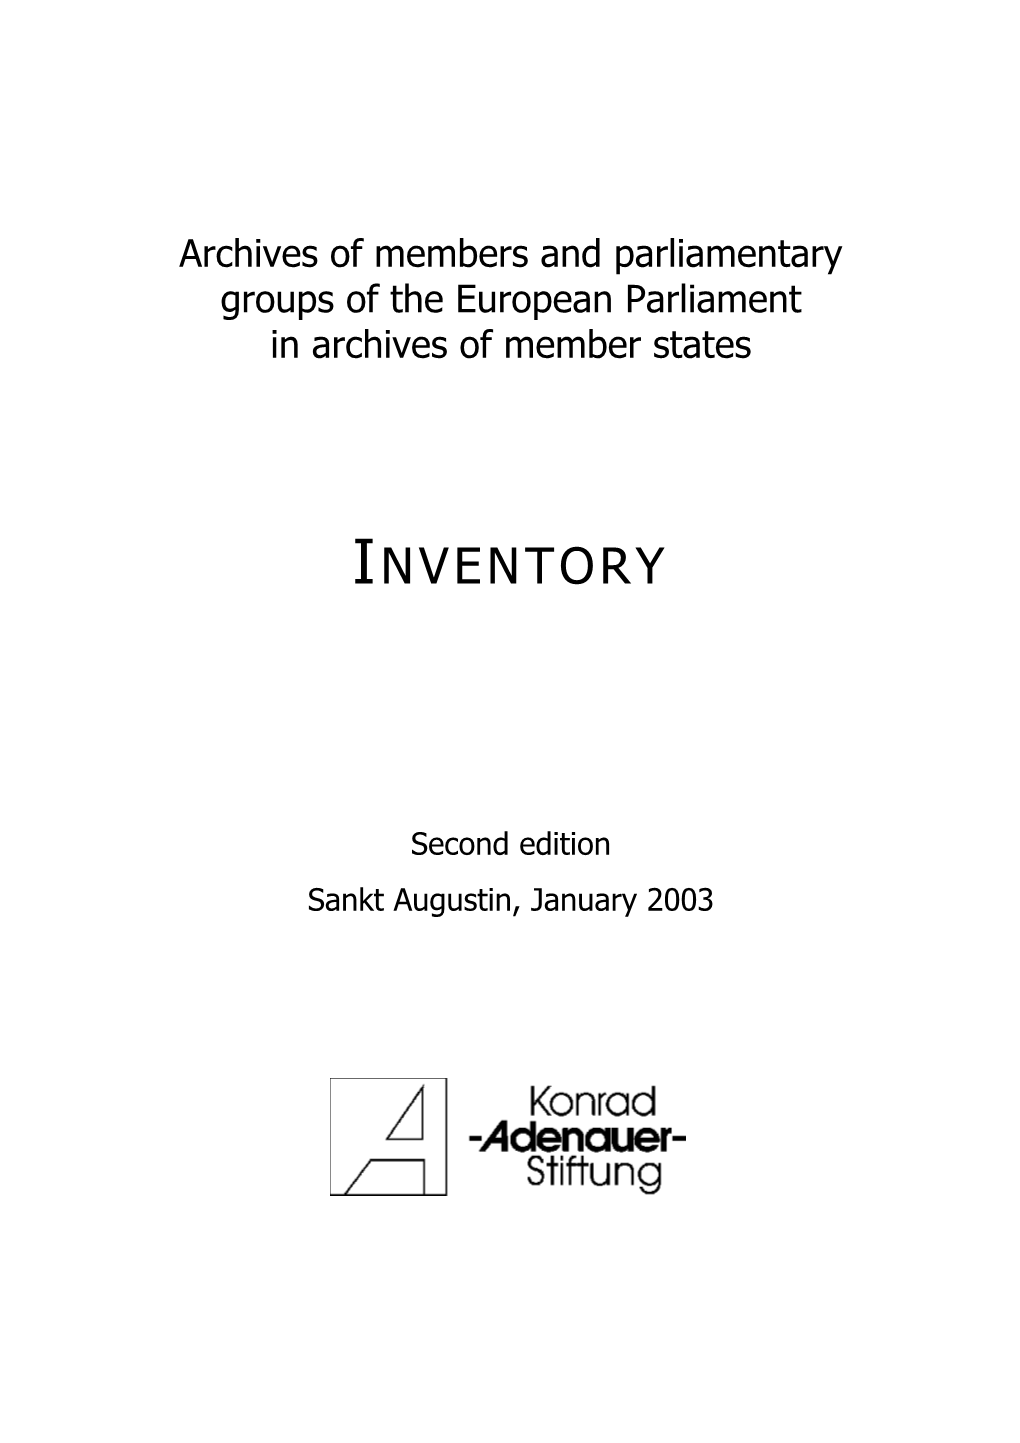 Archives of Members and Parliamentary Groups of the European Parliament in Archives of Member States